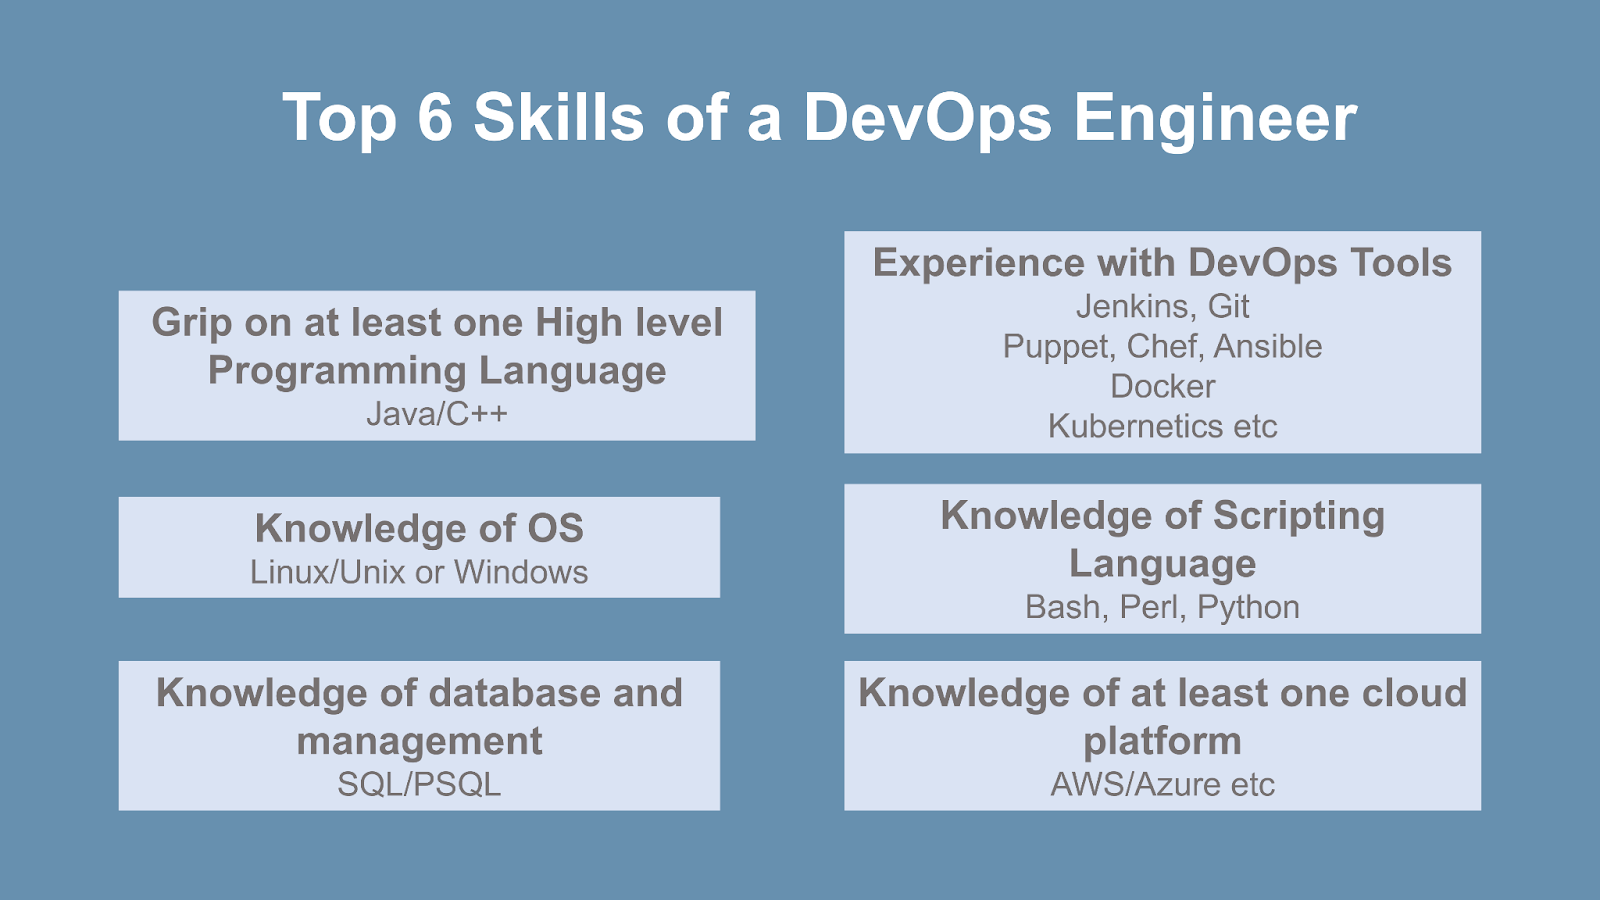 Top 6 most common skills of a DevOps engineer